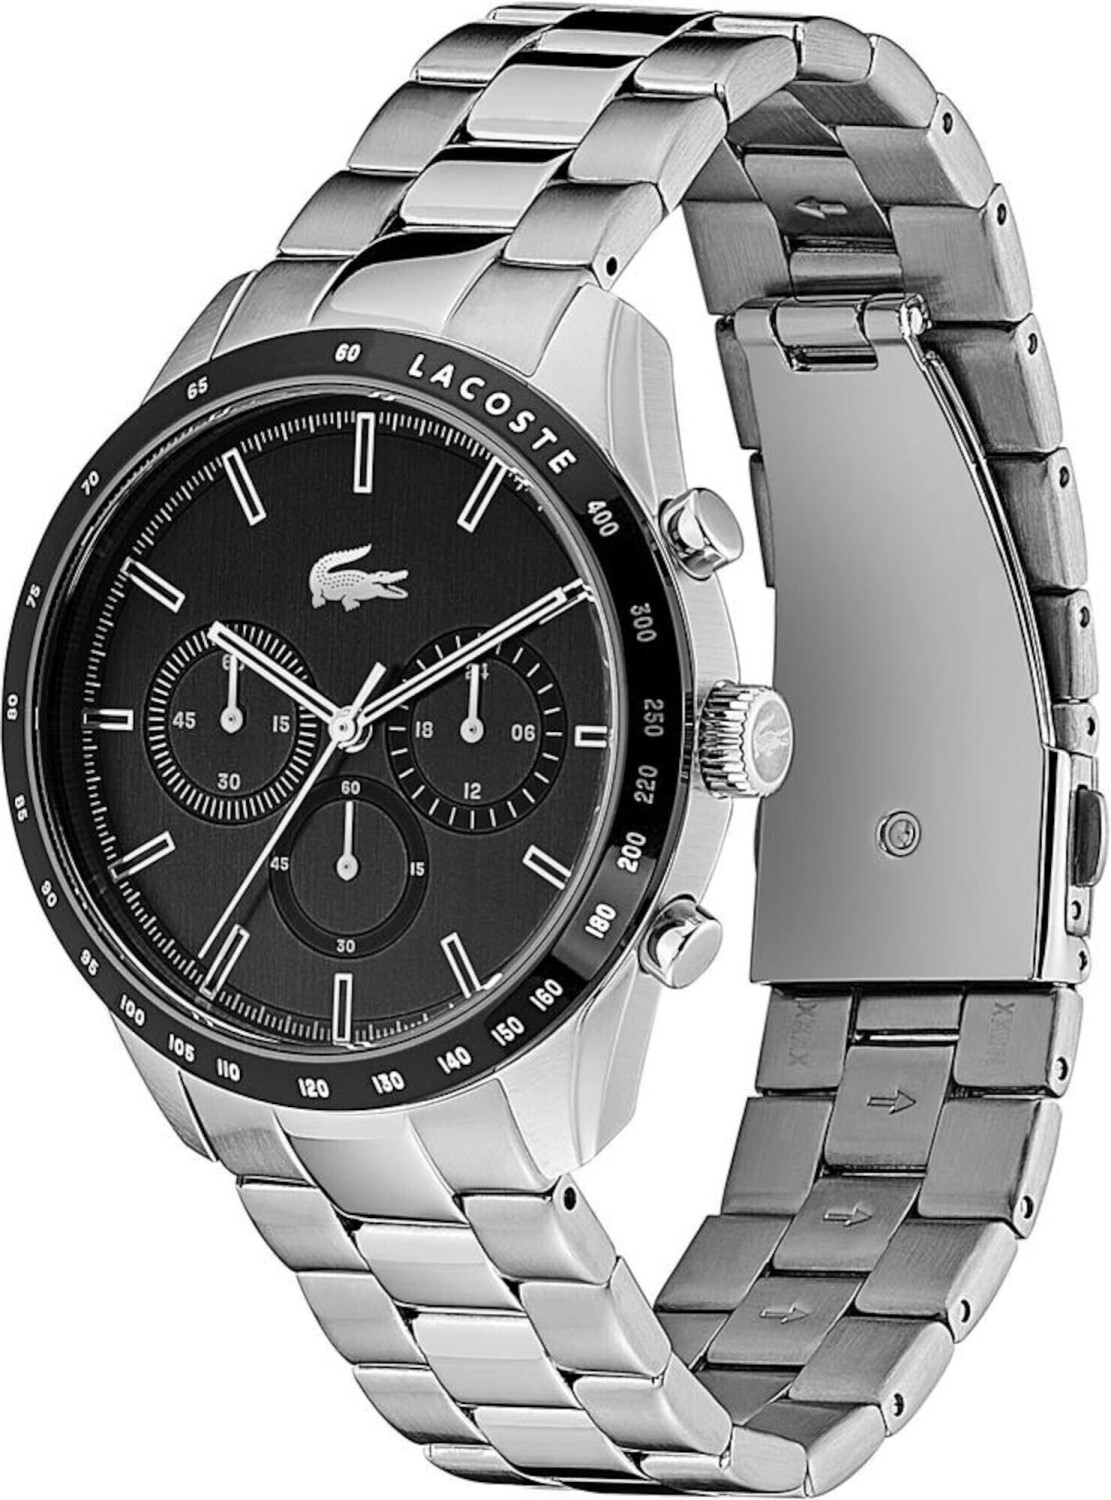 Buy Lacoste Boston Chronograph from Best £122.42 (Today) – Deals on